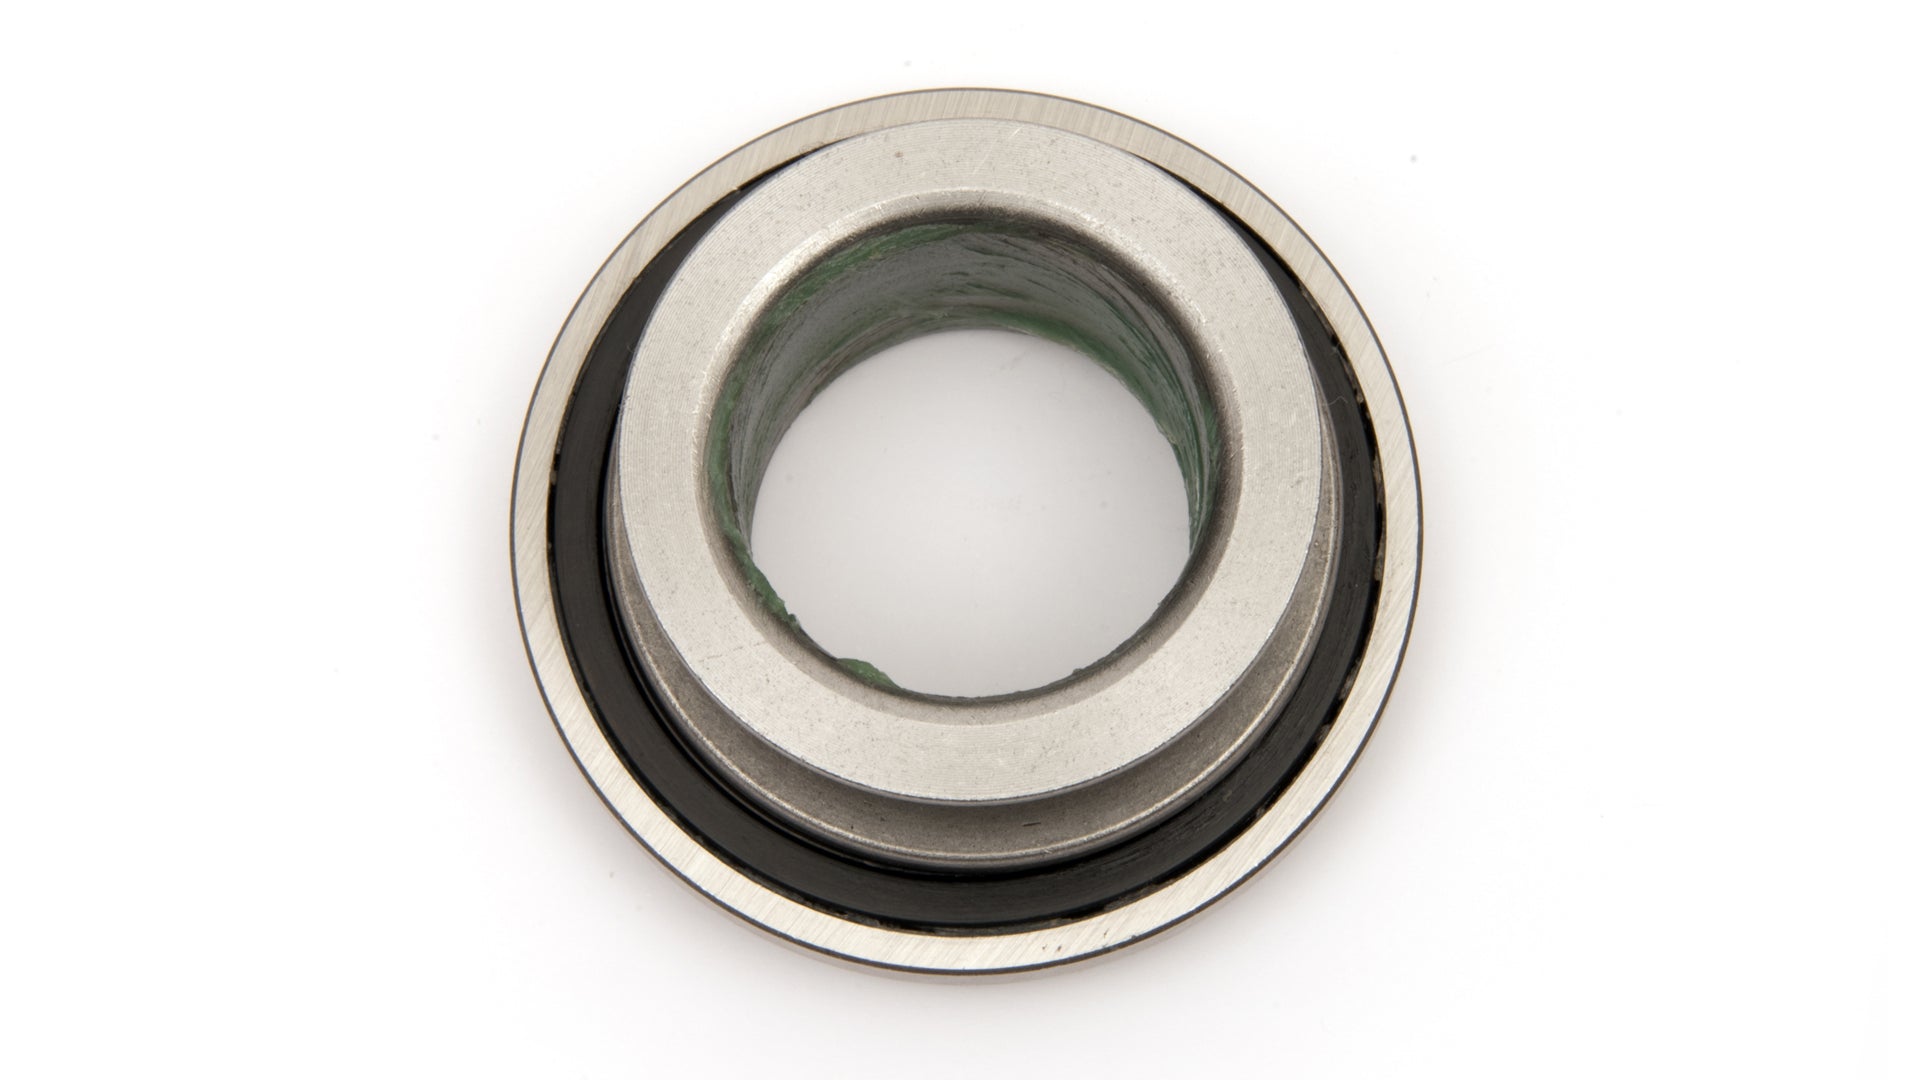 Centerforce(R) Accessories, Throw Out Bearing / Clutch Release Bearing